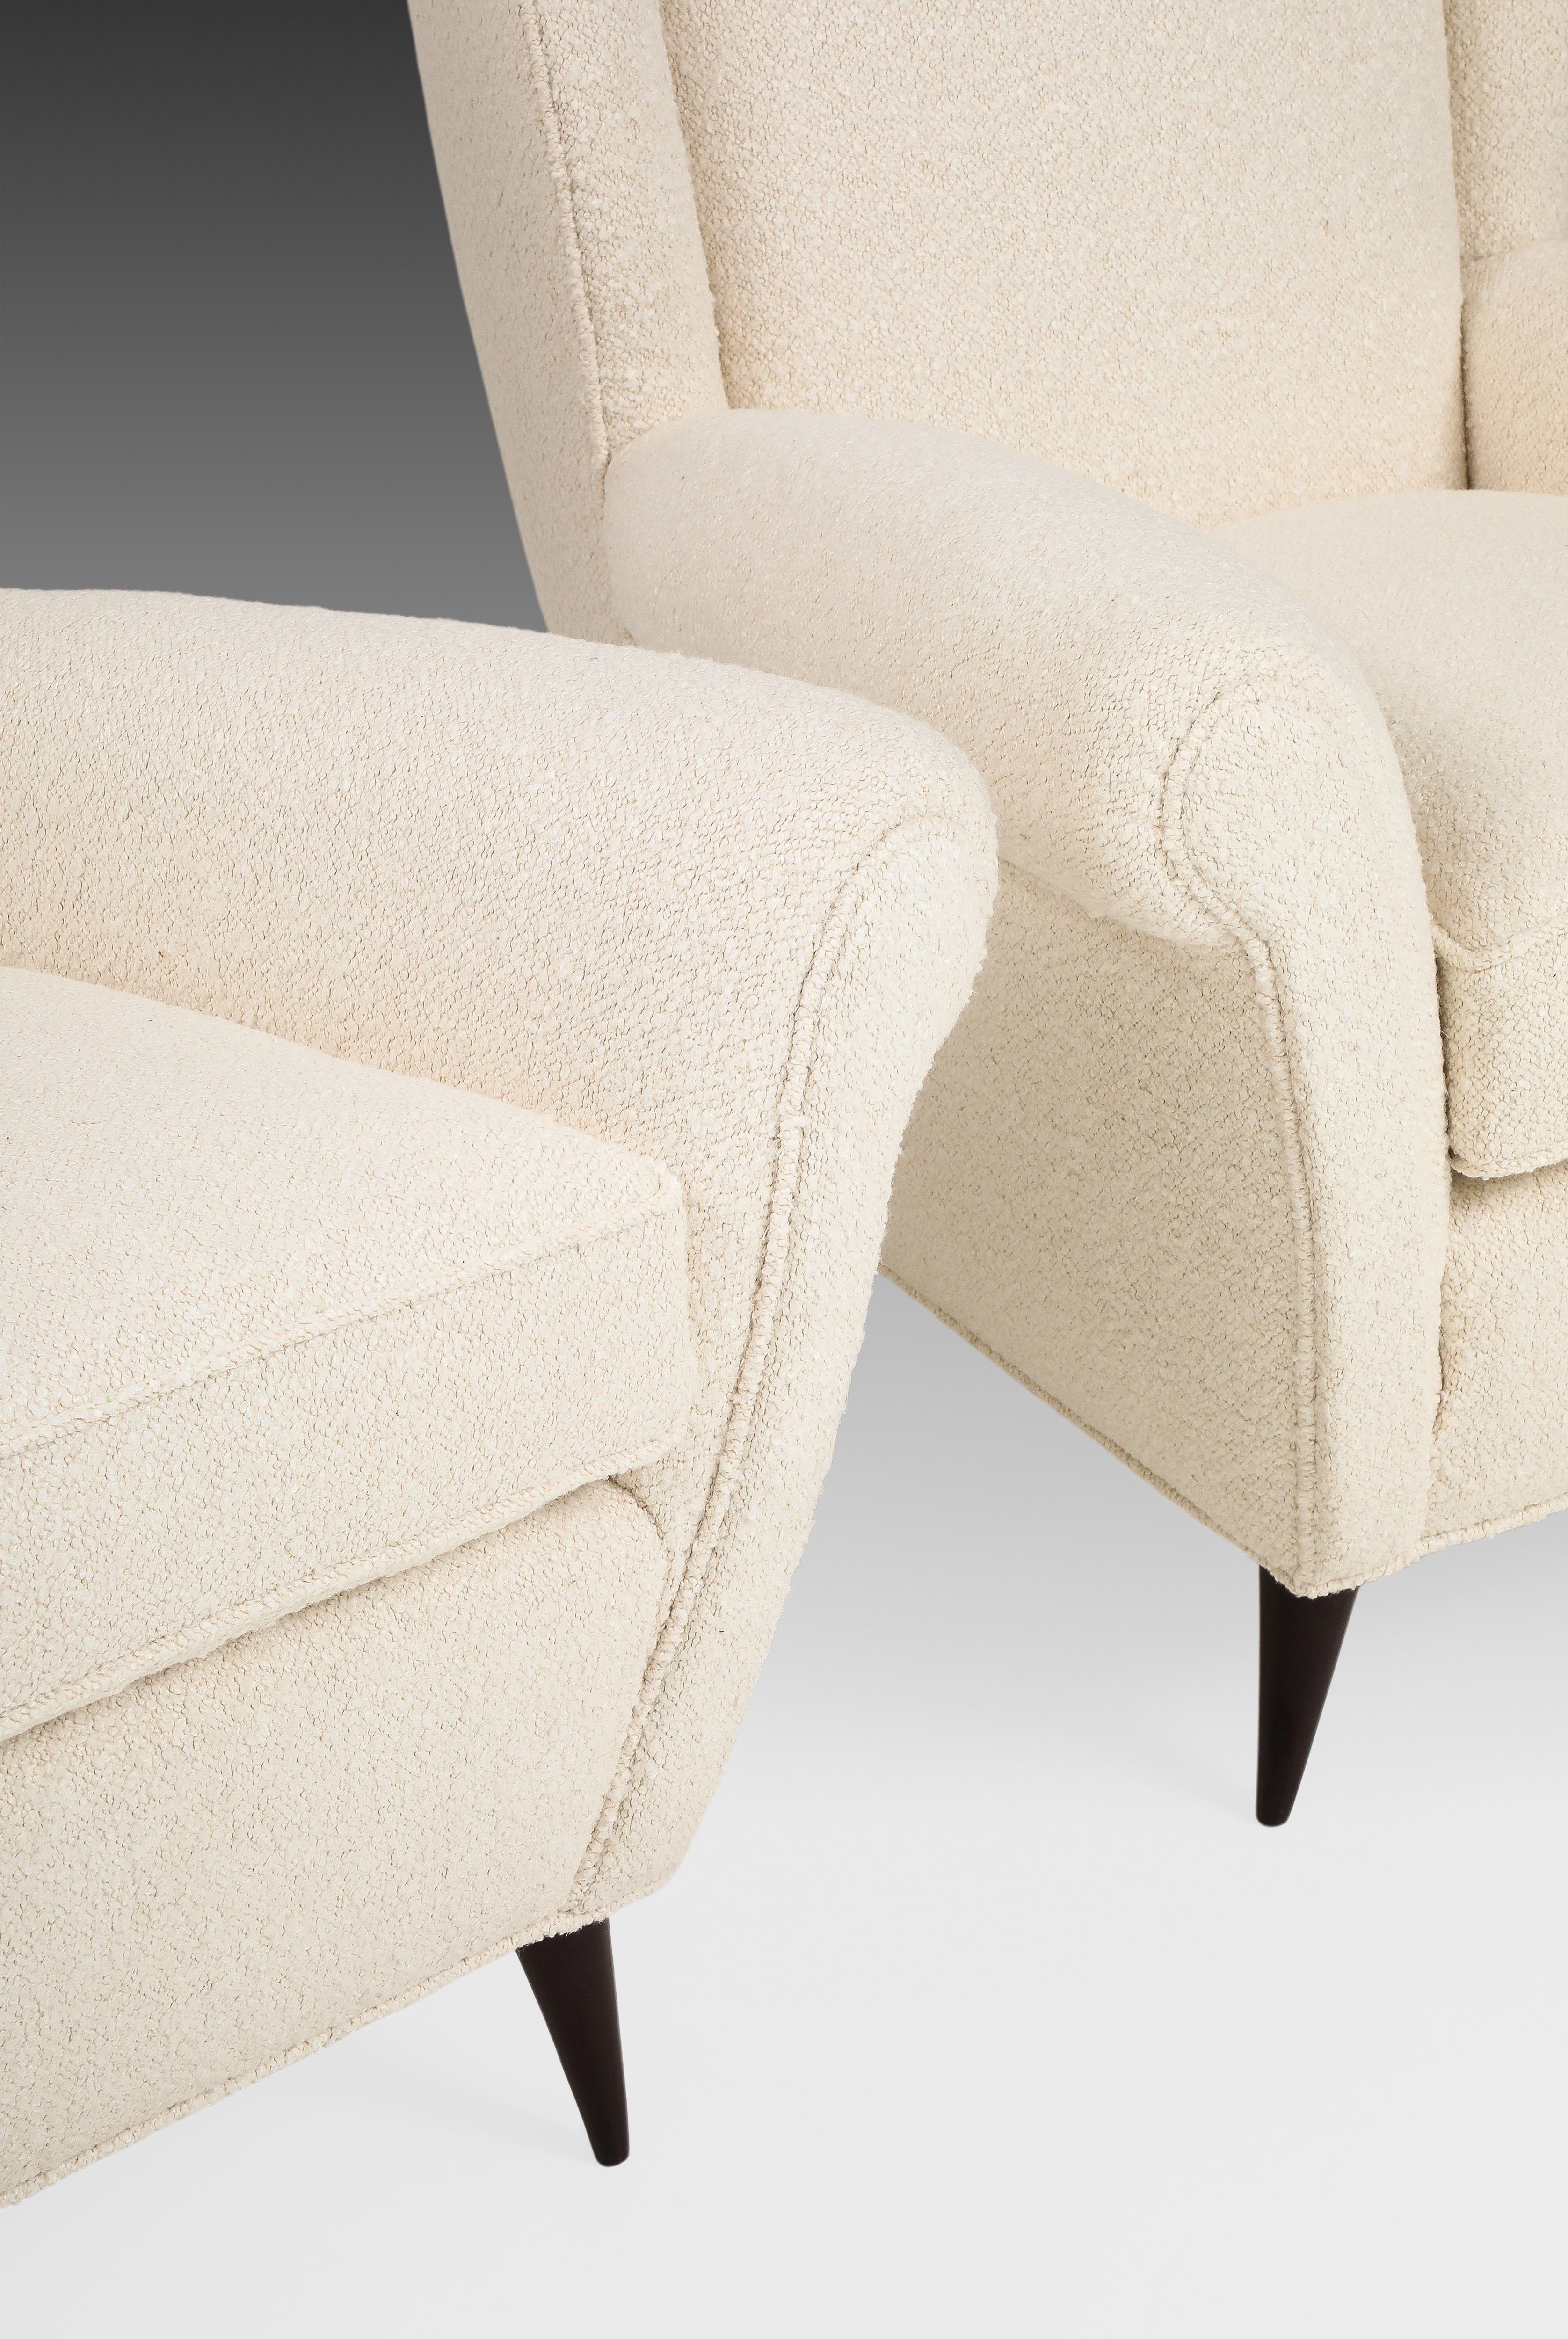 Gio Ponti Pair of High Back Armchairs in Ivory Bouclé, 1950s For Sale 2